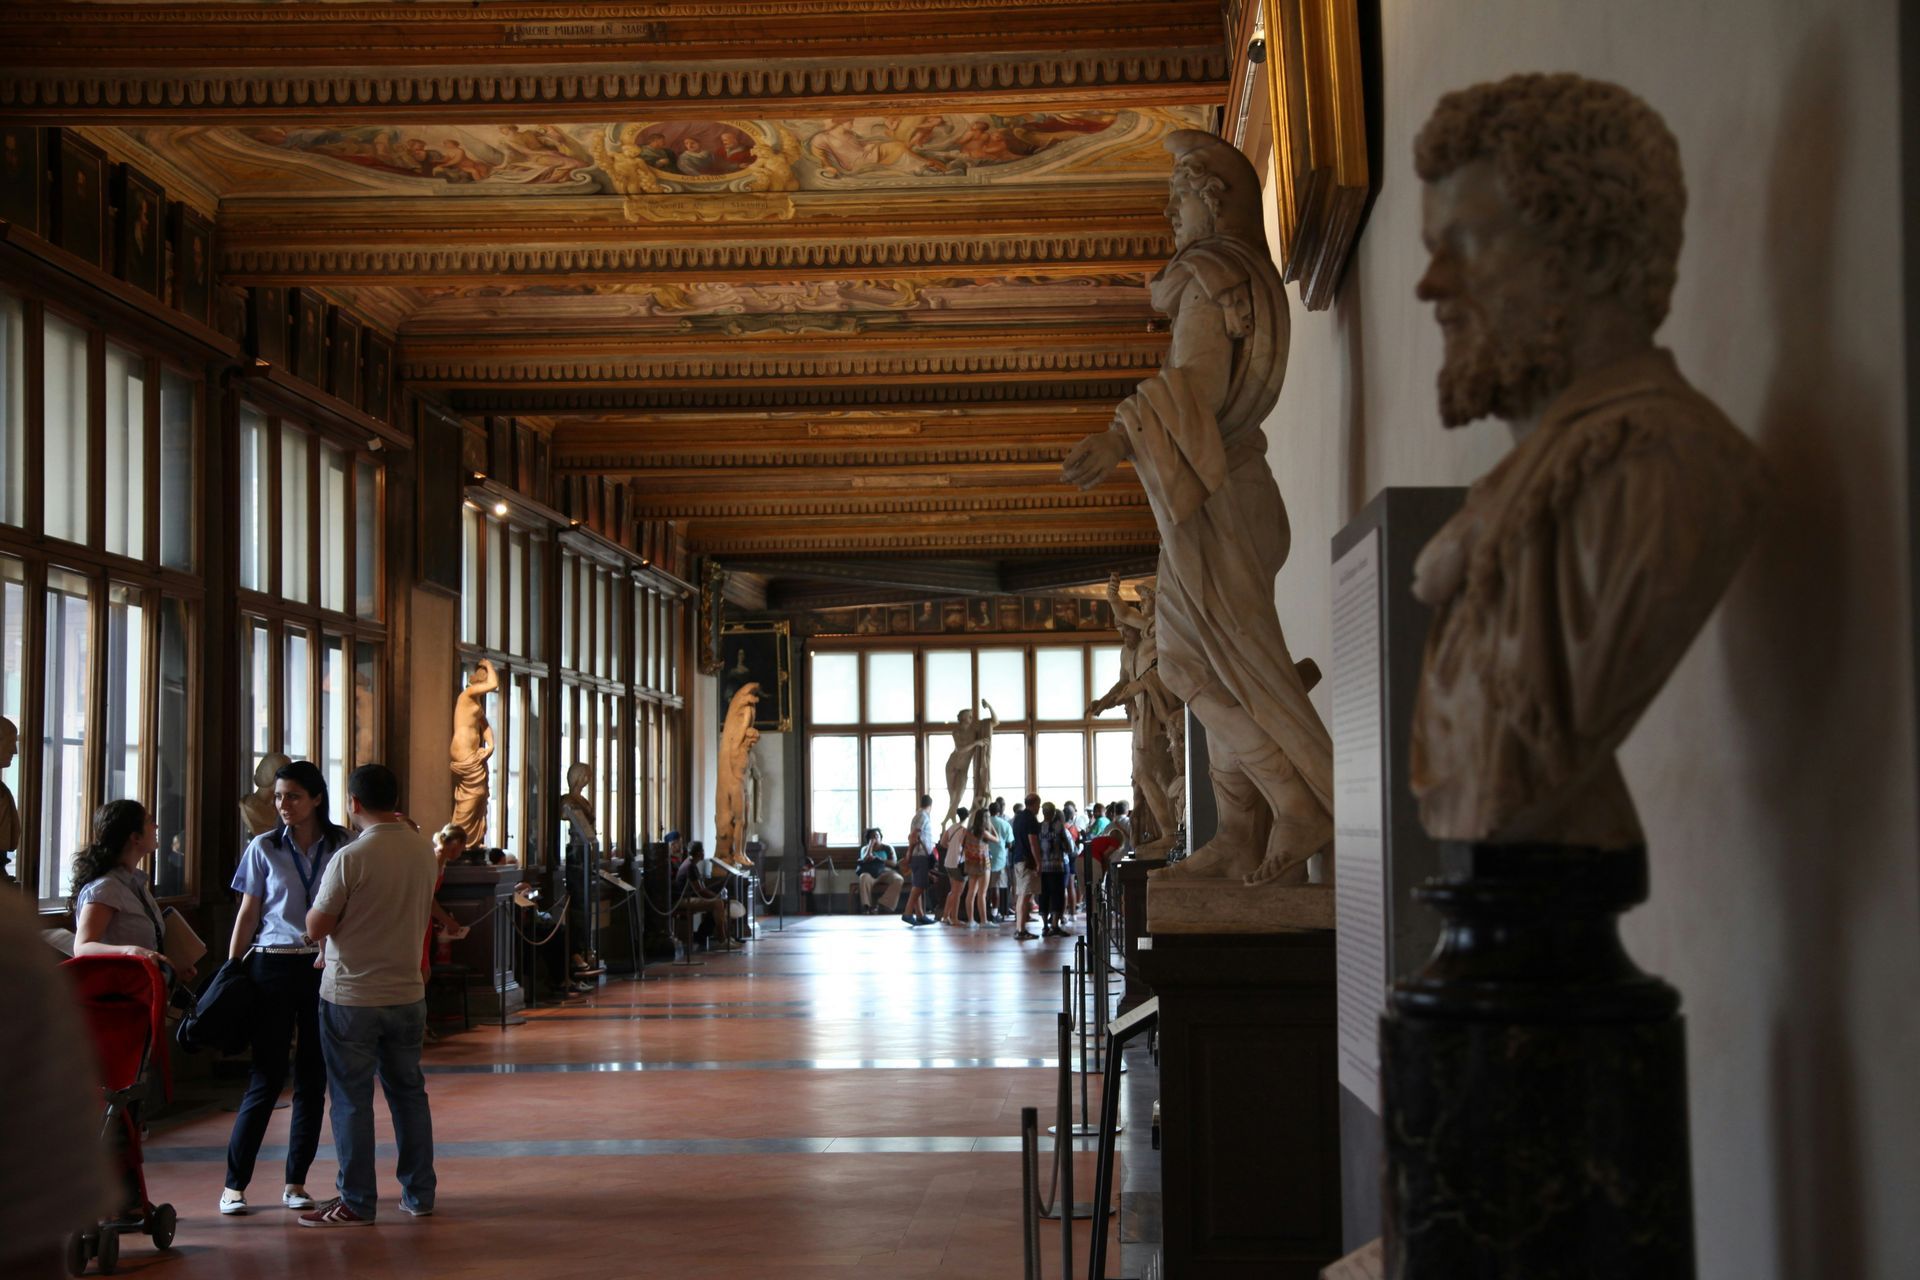 Planning Your Visit to the Uffizi Gallery